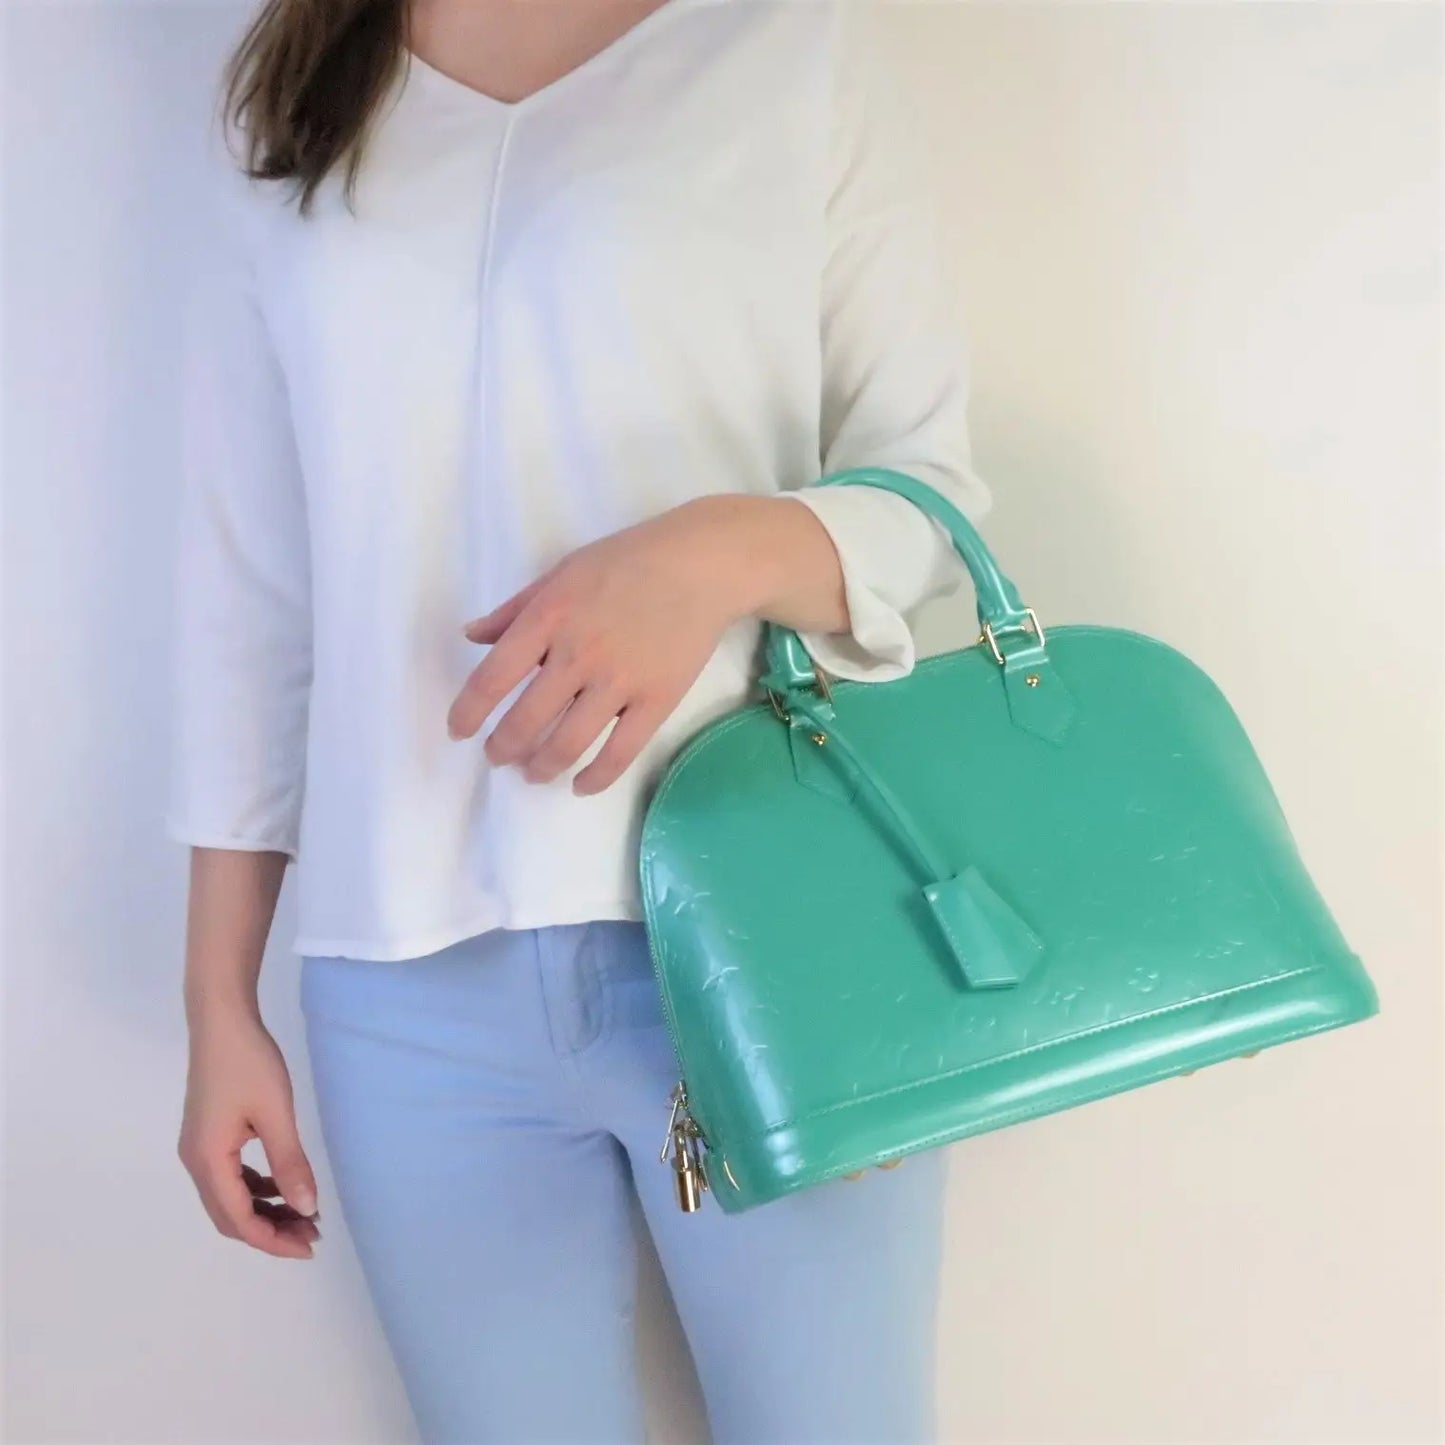 Most Amazing color Louis Vuitton ever has for Alma. Tiffany Blue!!!